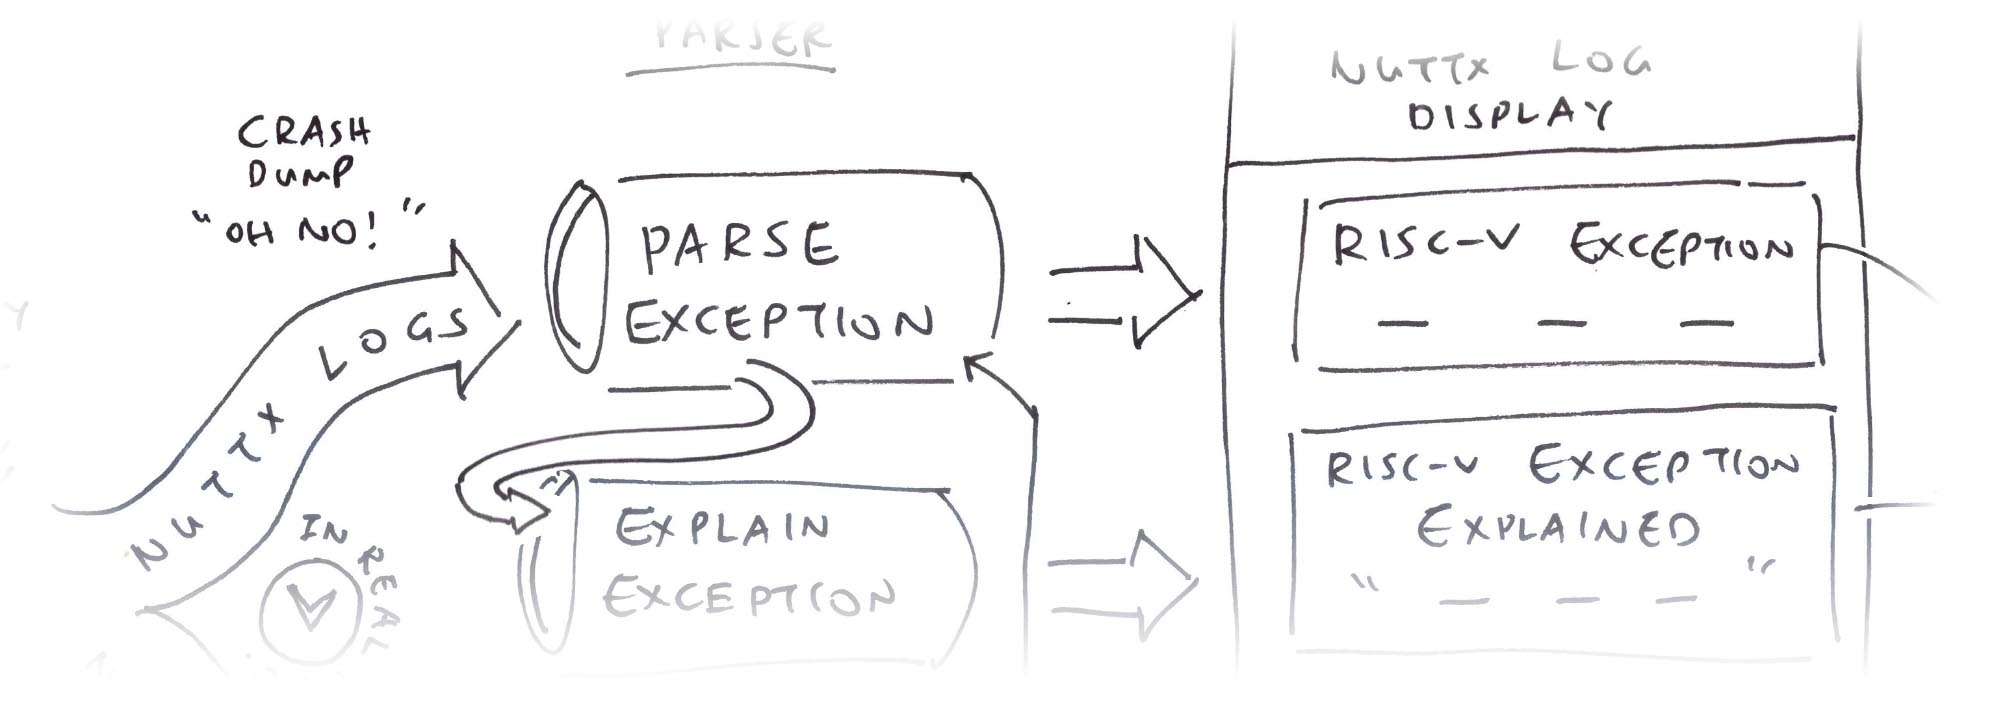 Parse the RISC-V Exception